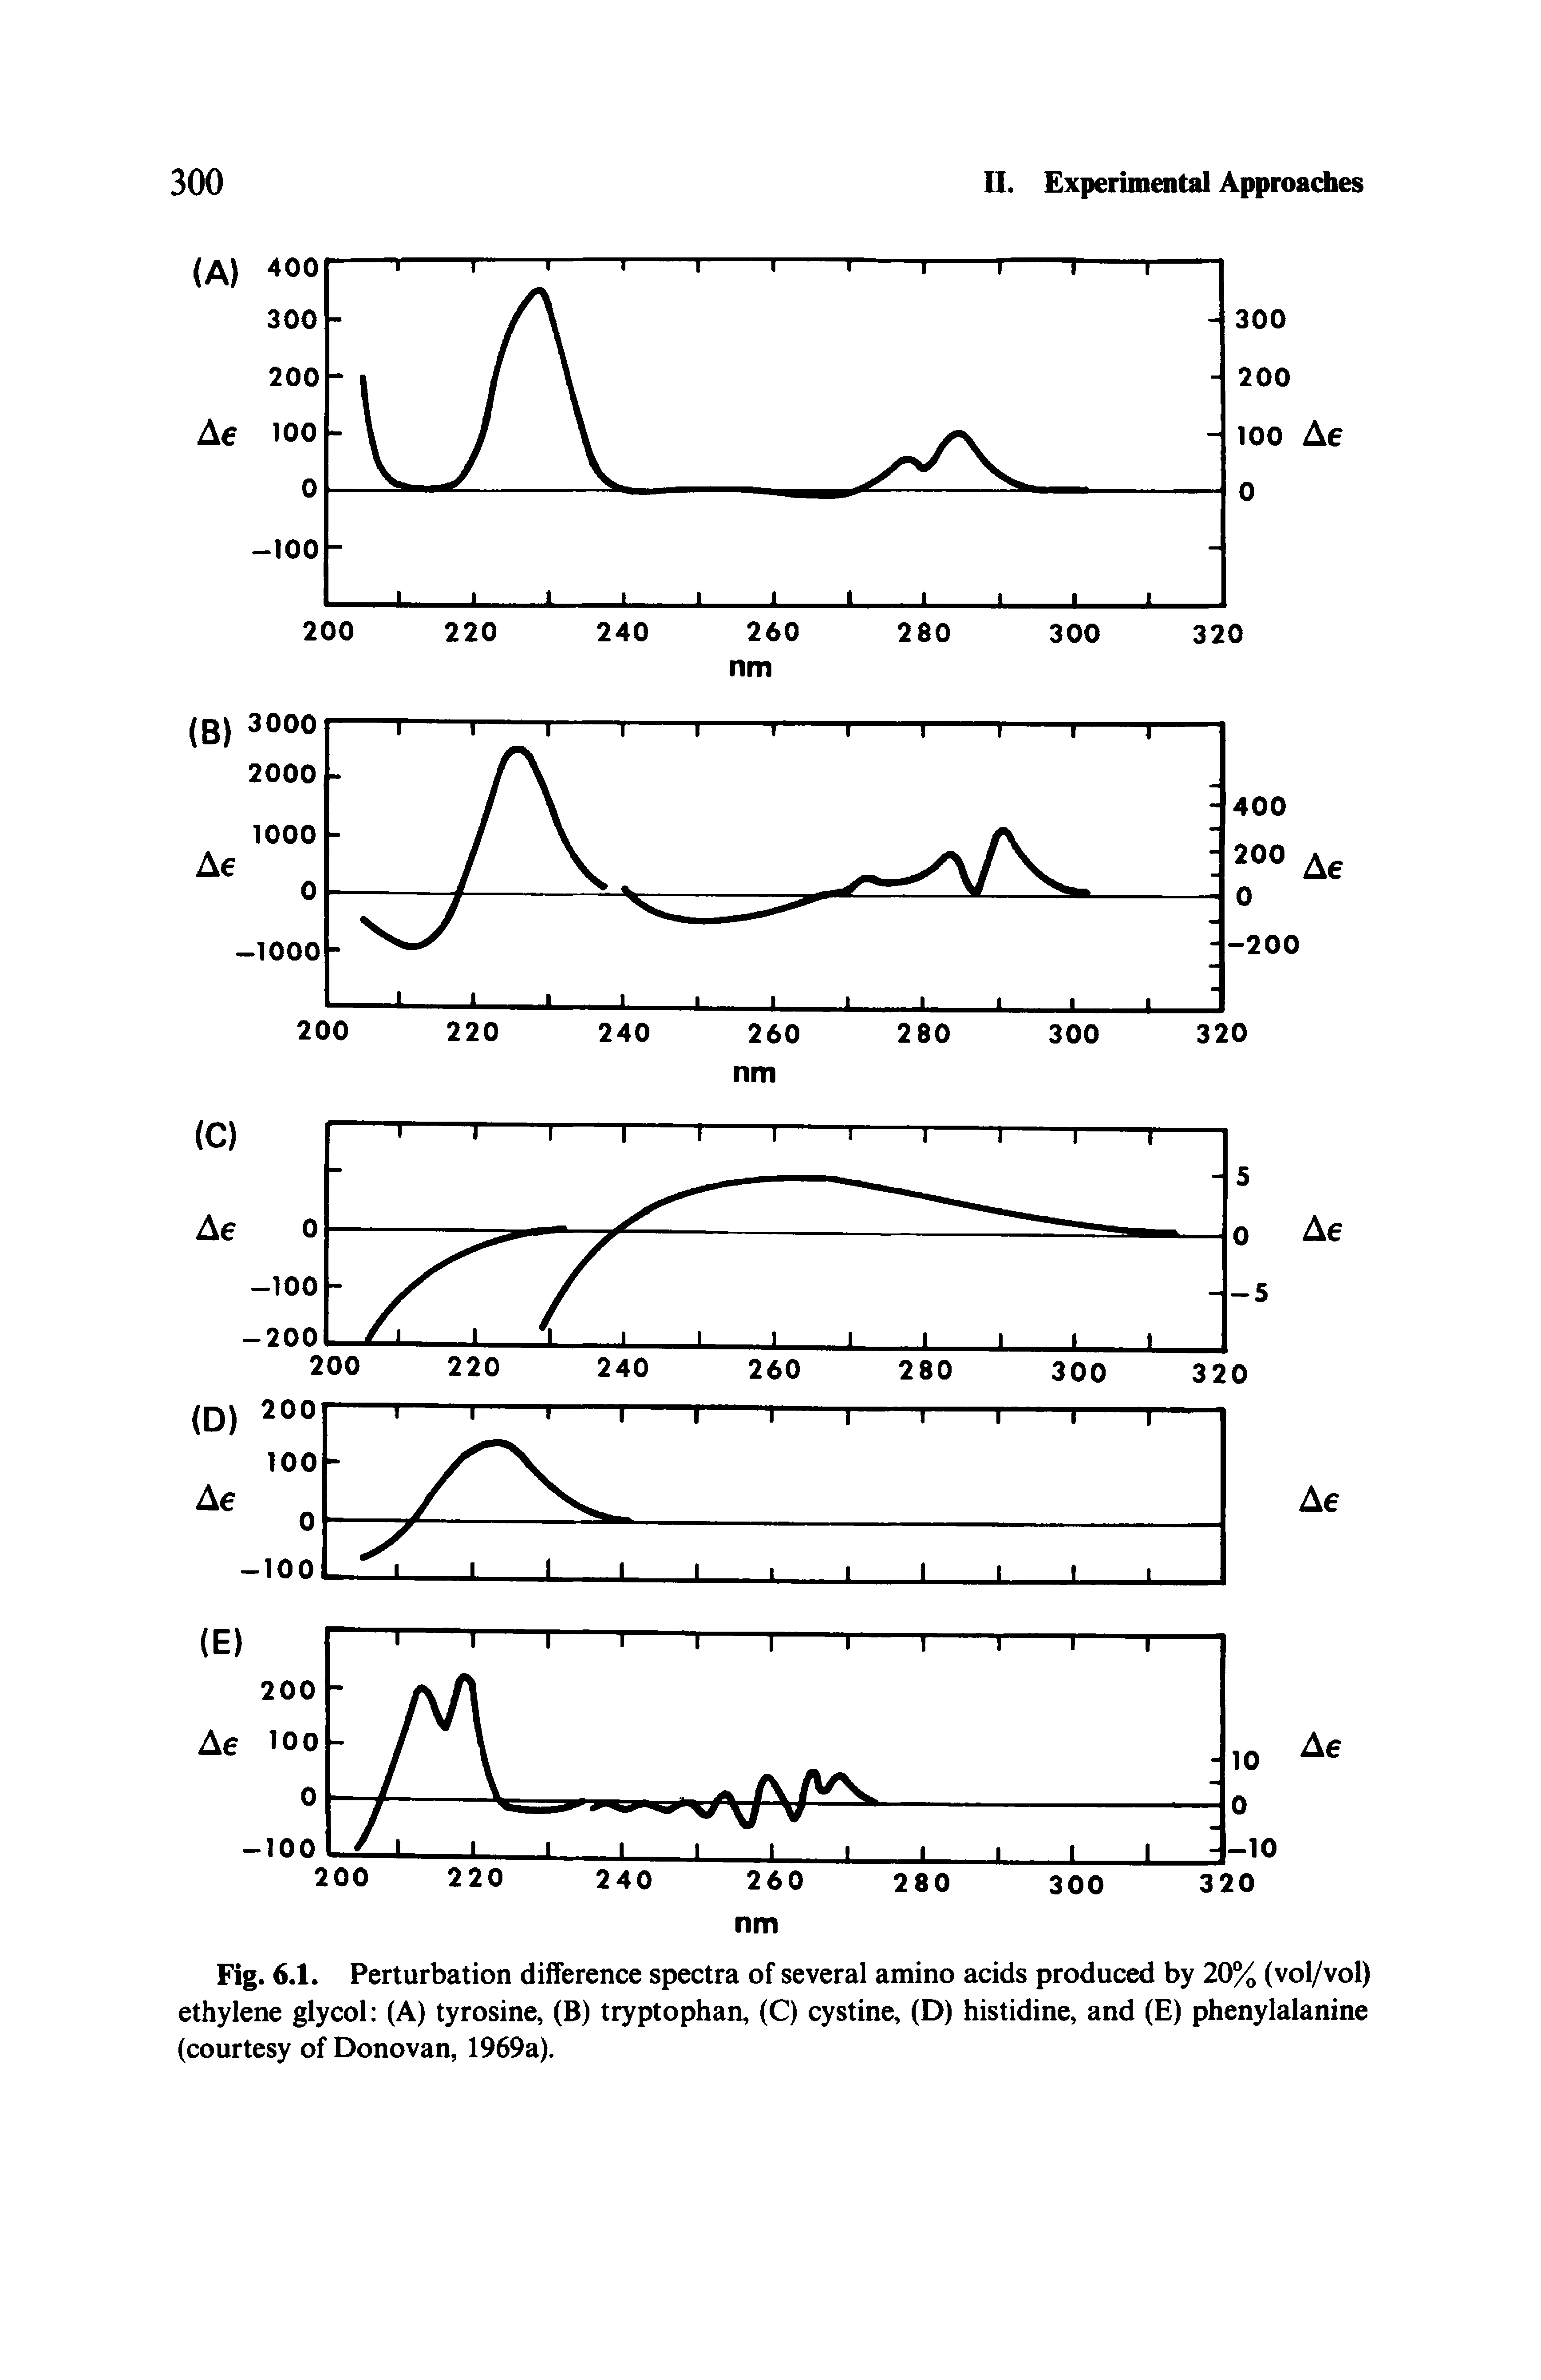 Fig. 6.1. Perturbation difference spectra of several amino acids produced by 20% (vol/vol) ethylene glycol (A) tyrosine, (B) tryptophan, (C) cystine, (D) histidine, and (E) phenylalanine (courtesy of Donovan, 1969a).